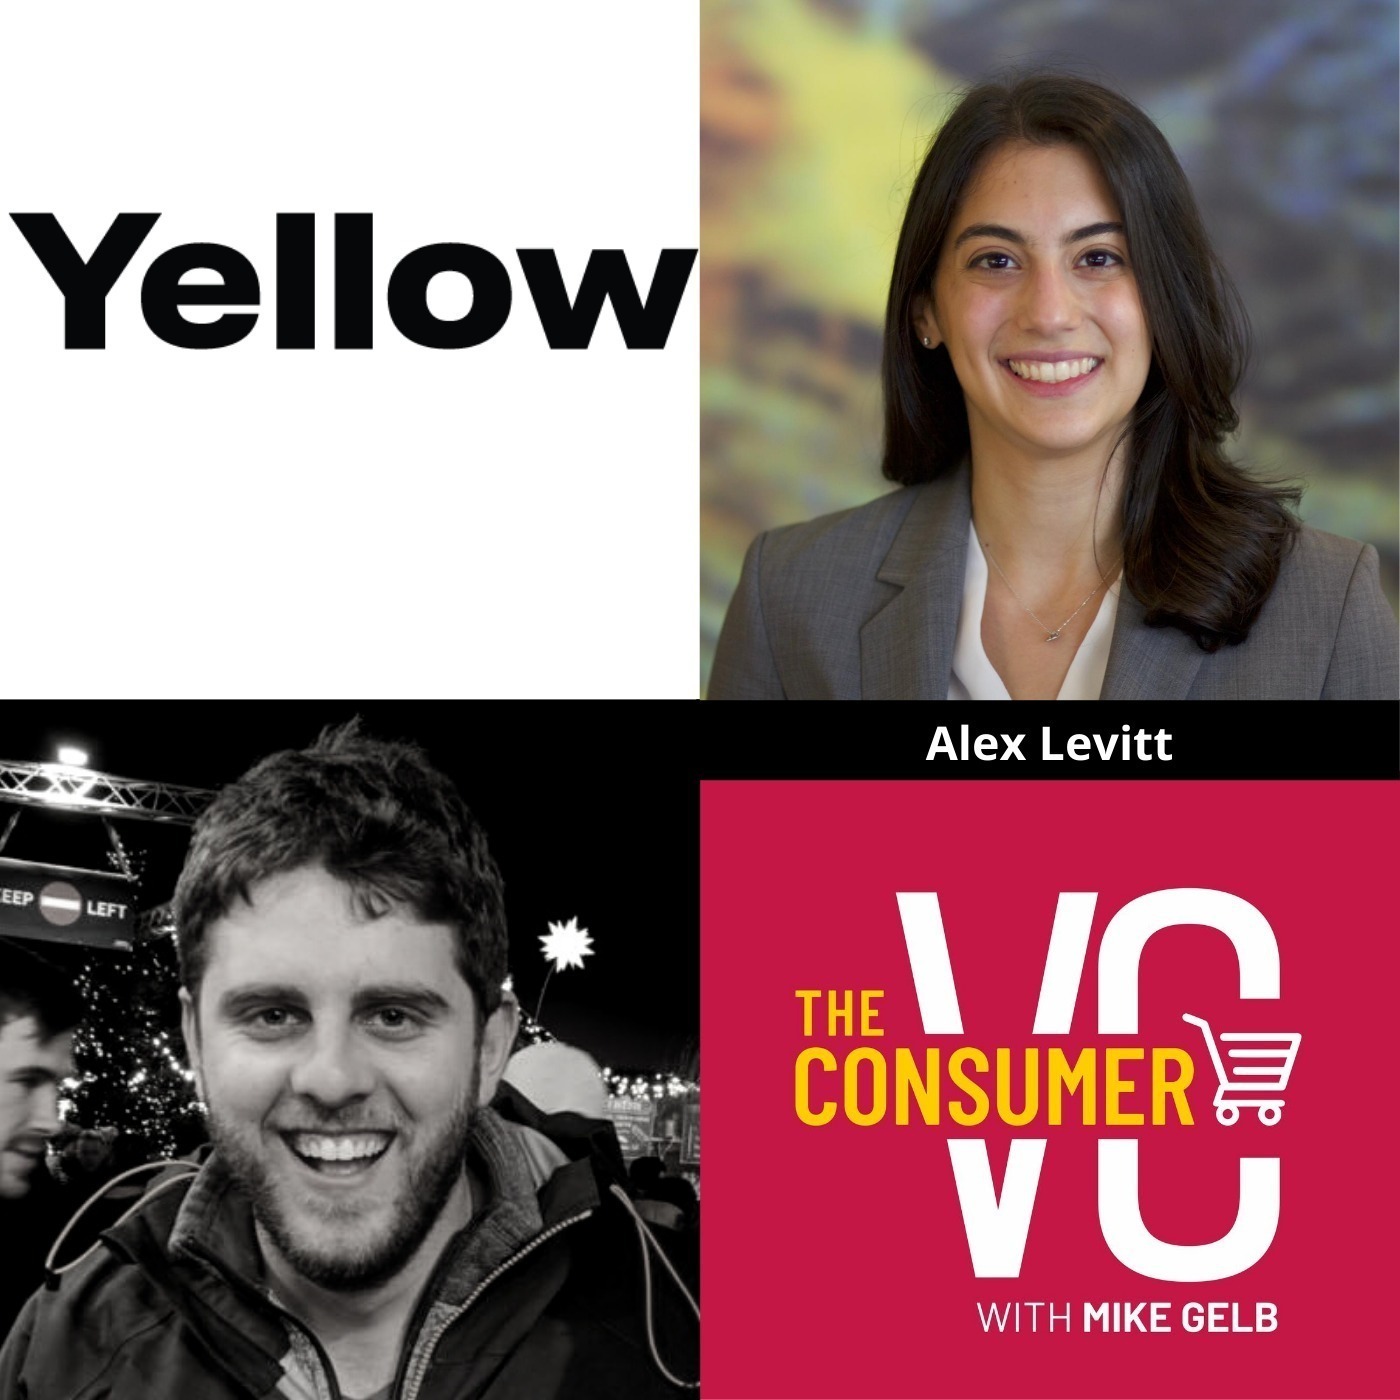 Alex Levitt (Yellow) - Inside Snap Inc.'s Launchpad for Startups, Building Products On Top of Social Platforms, and Her Diligence Process